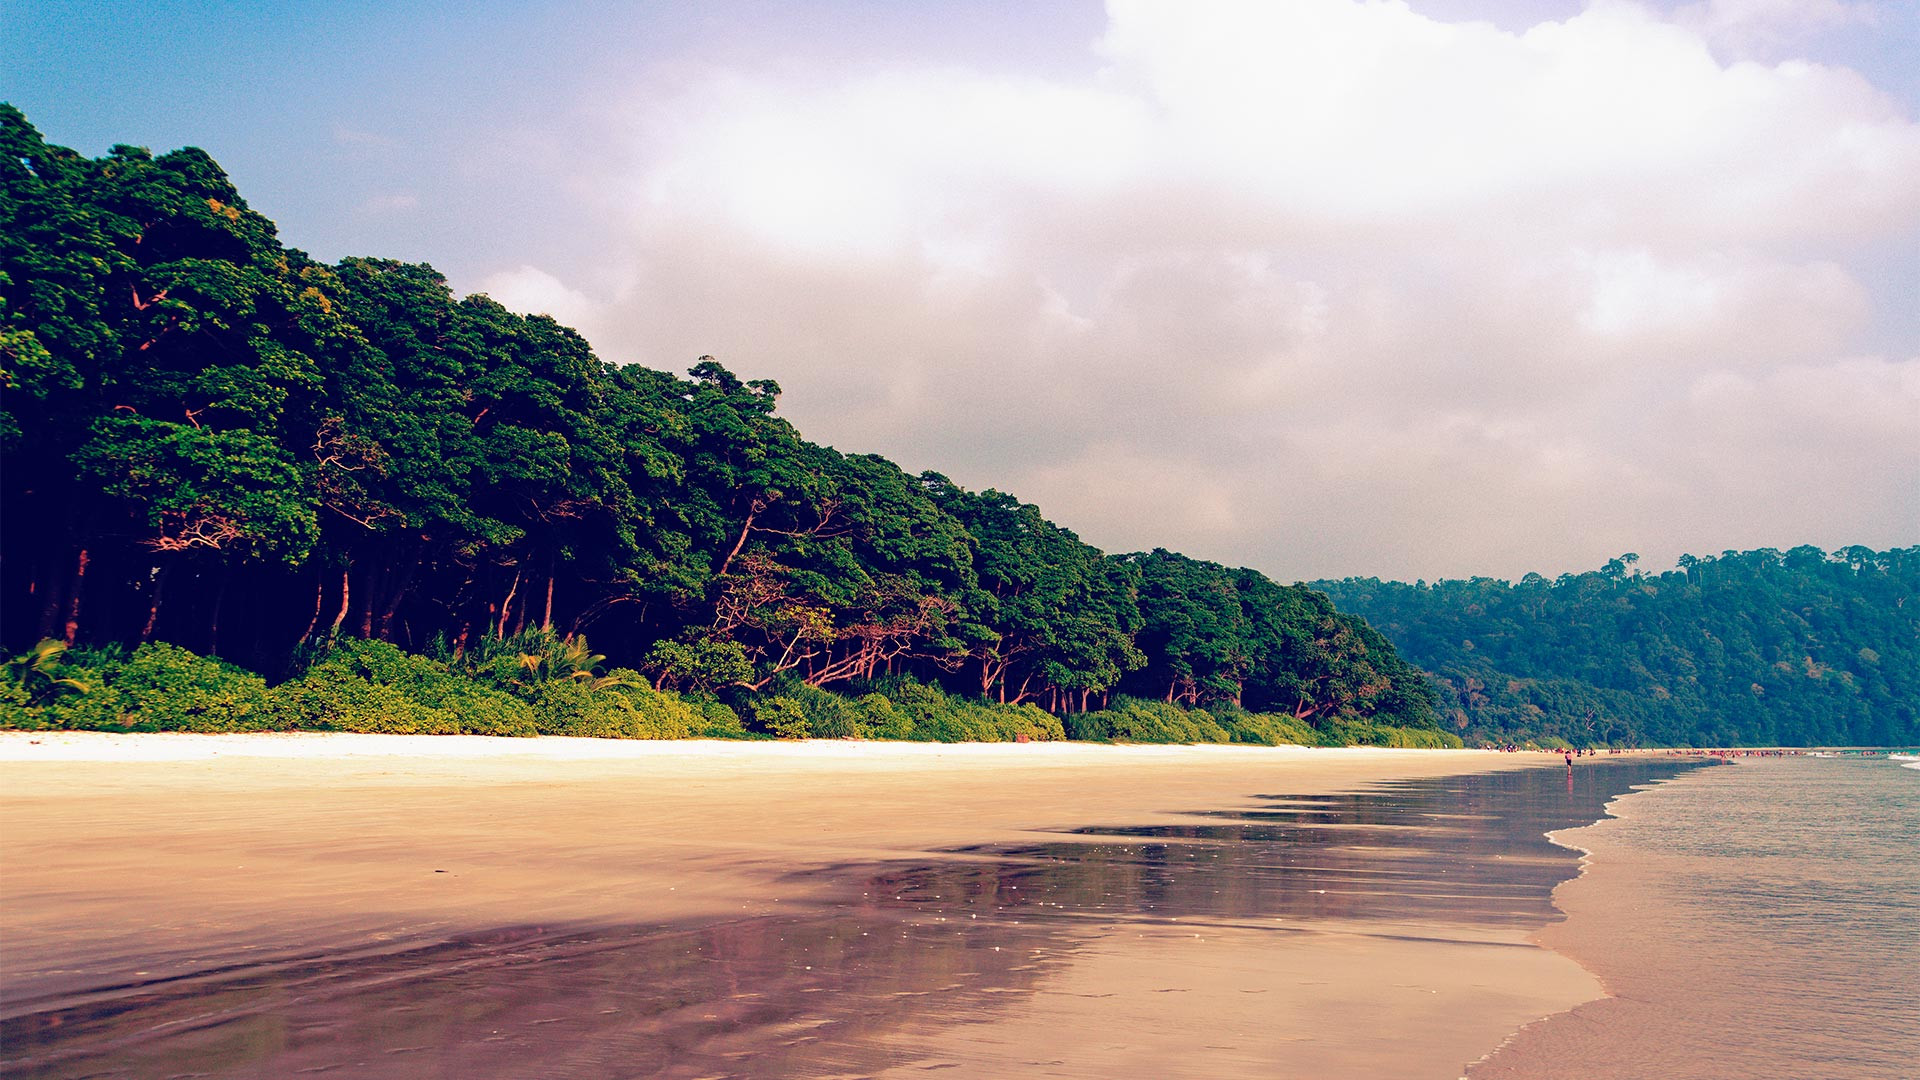 A beach in the Andaman Islands